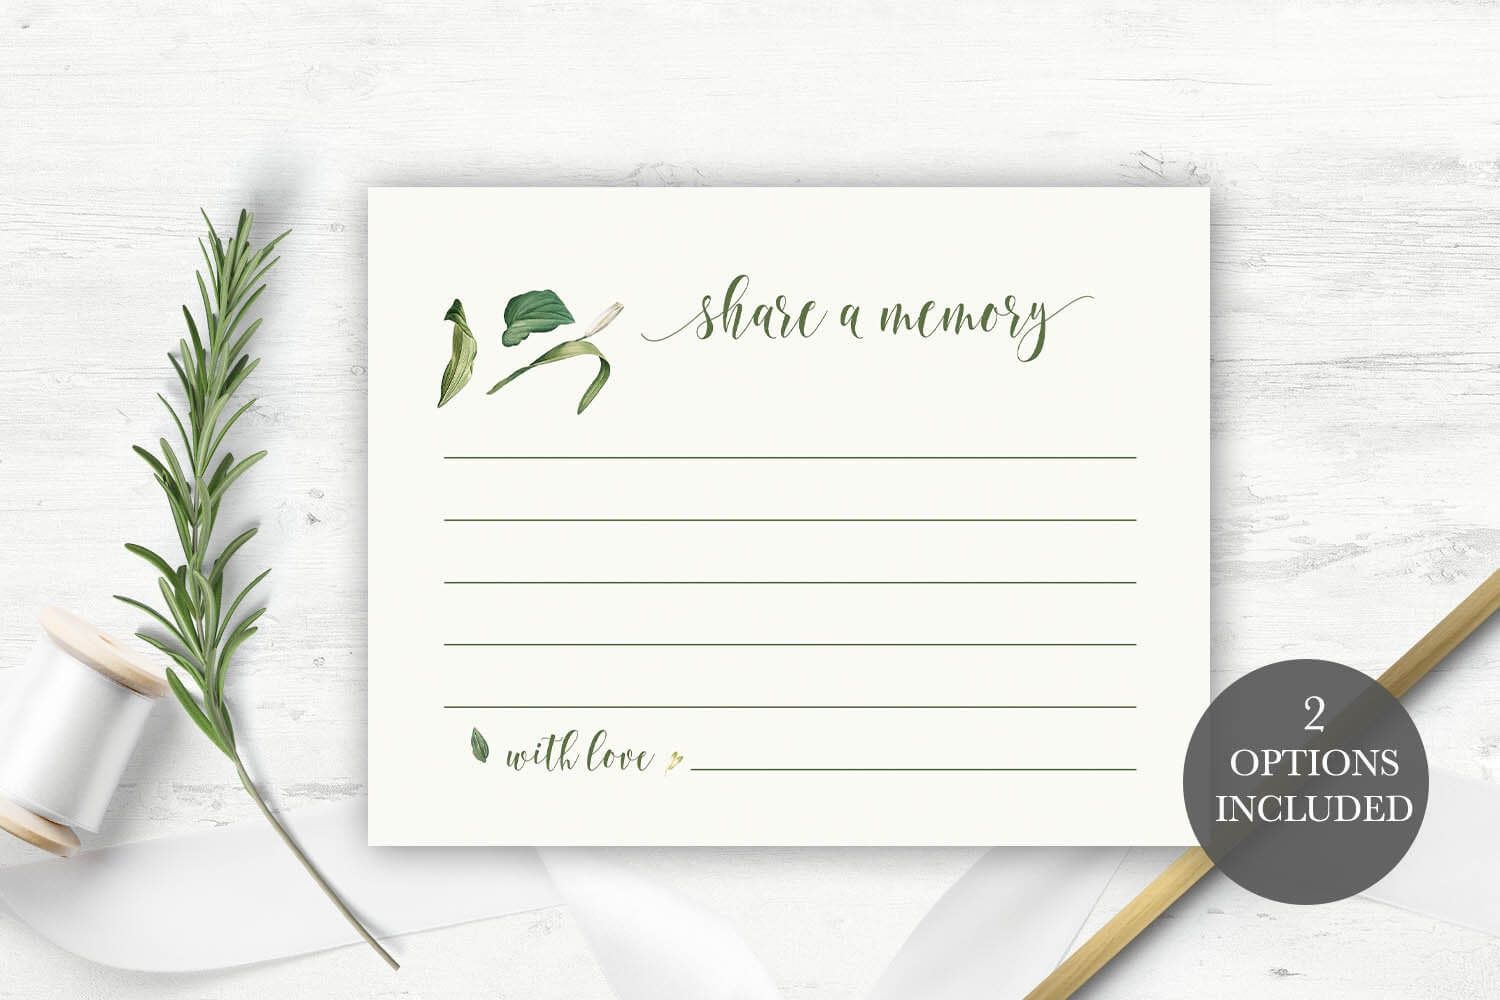 Funeral Share A Memory Card | Printable Funeral Memory Card | Greenery  Memorial Card Template | Funeral Cards | Memorial Cards Template Intended For In Memory Cards Templates